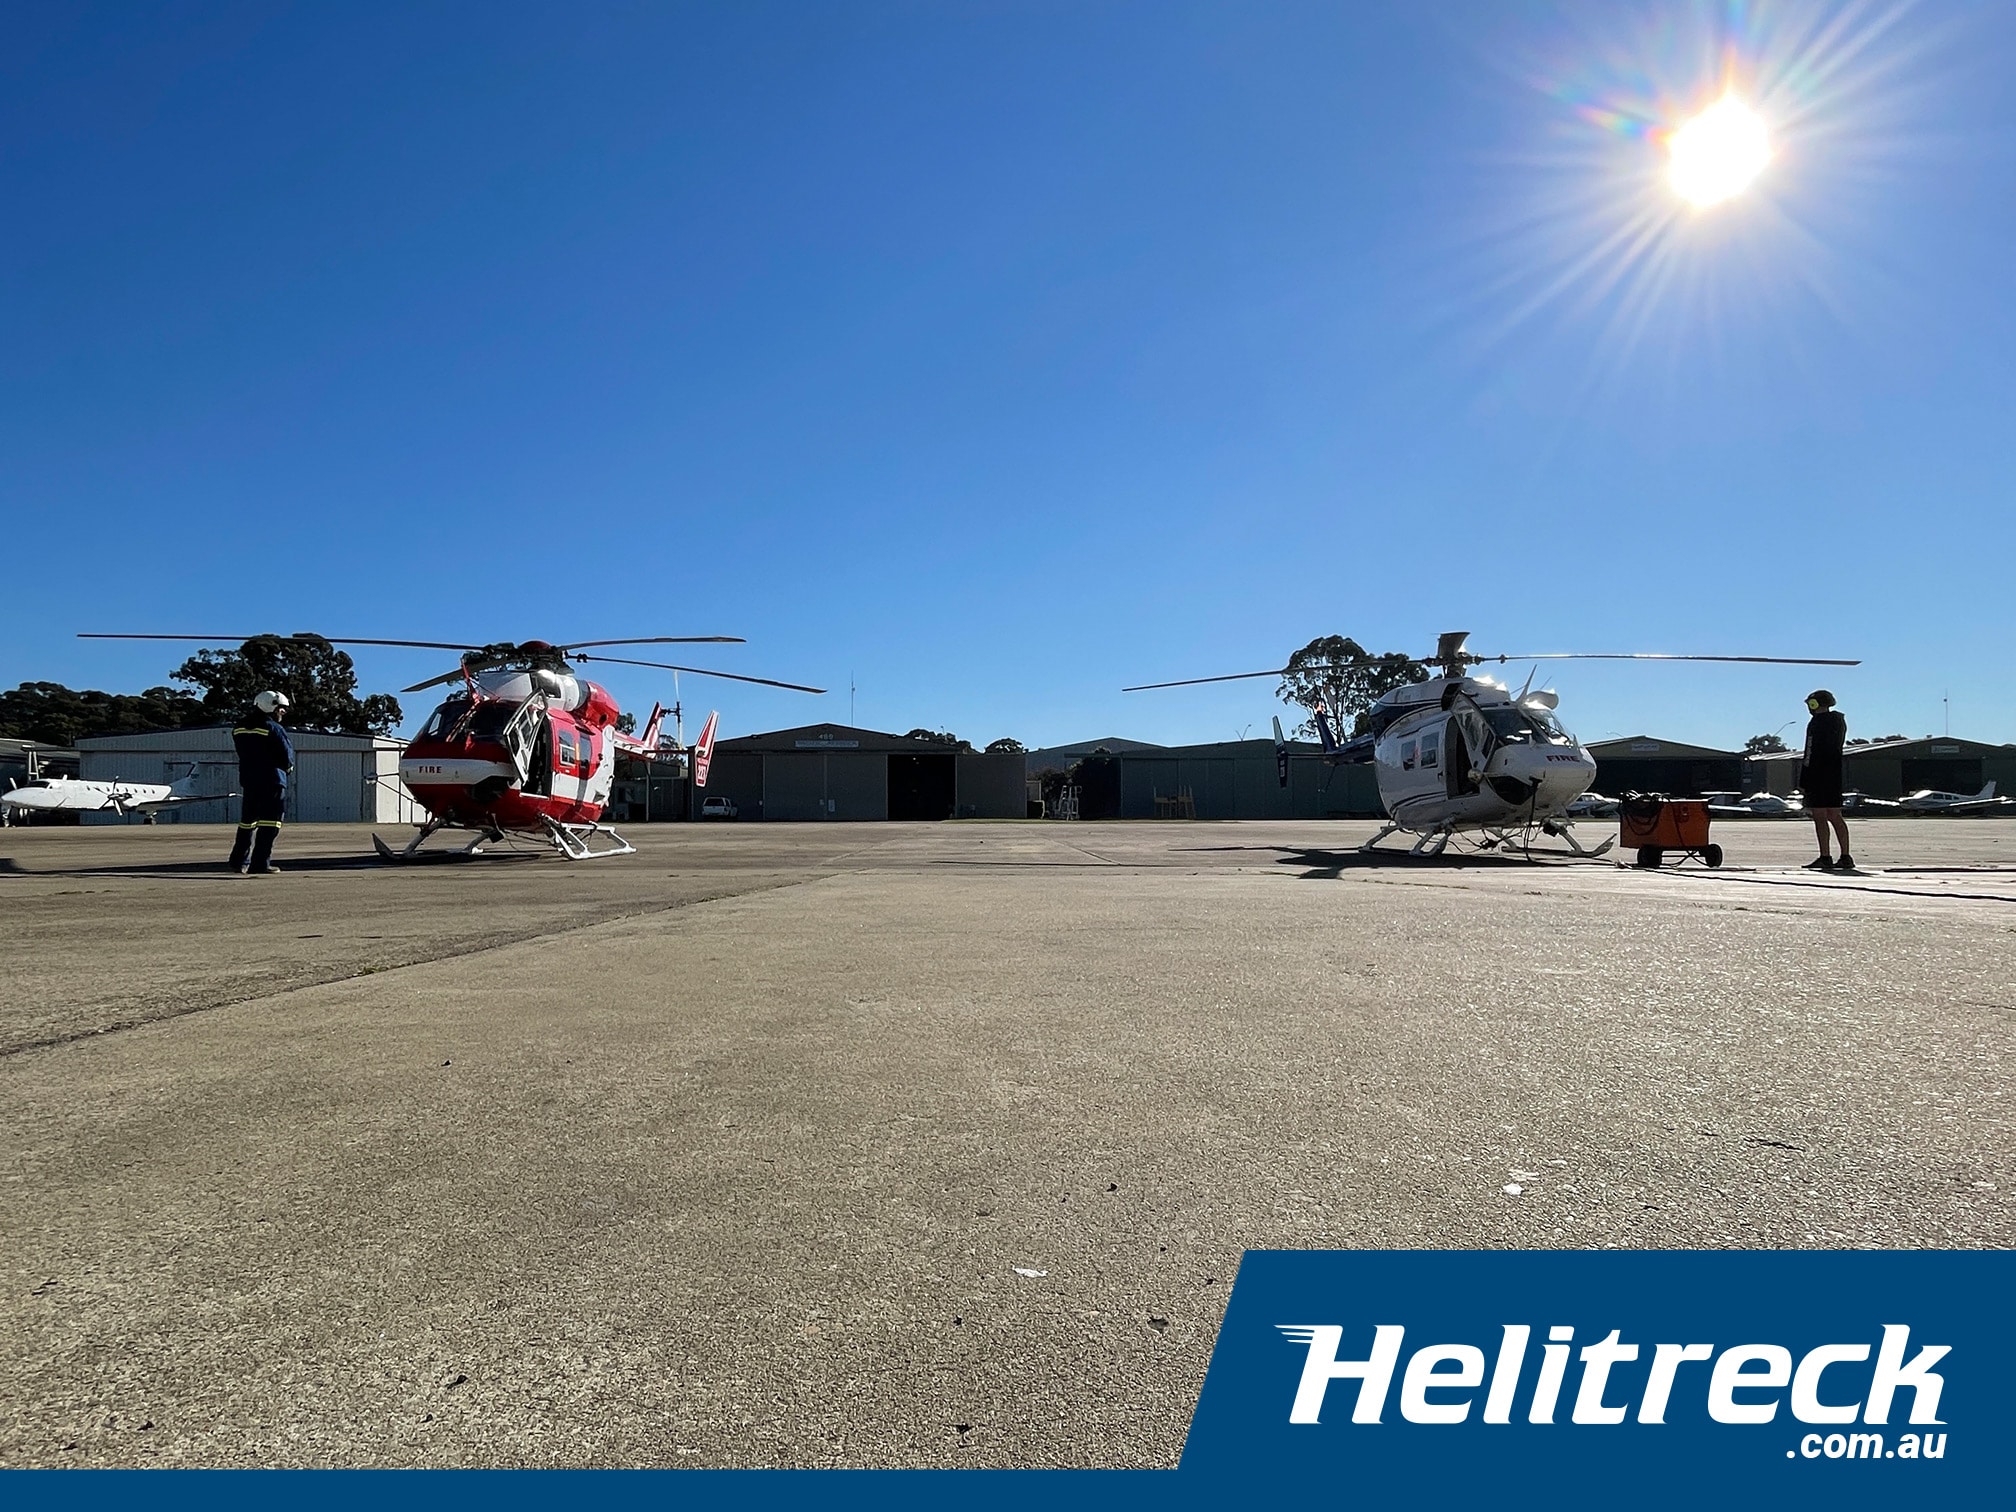 fiddletown bushfire support helitrexck helicopters